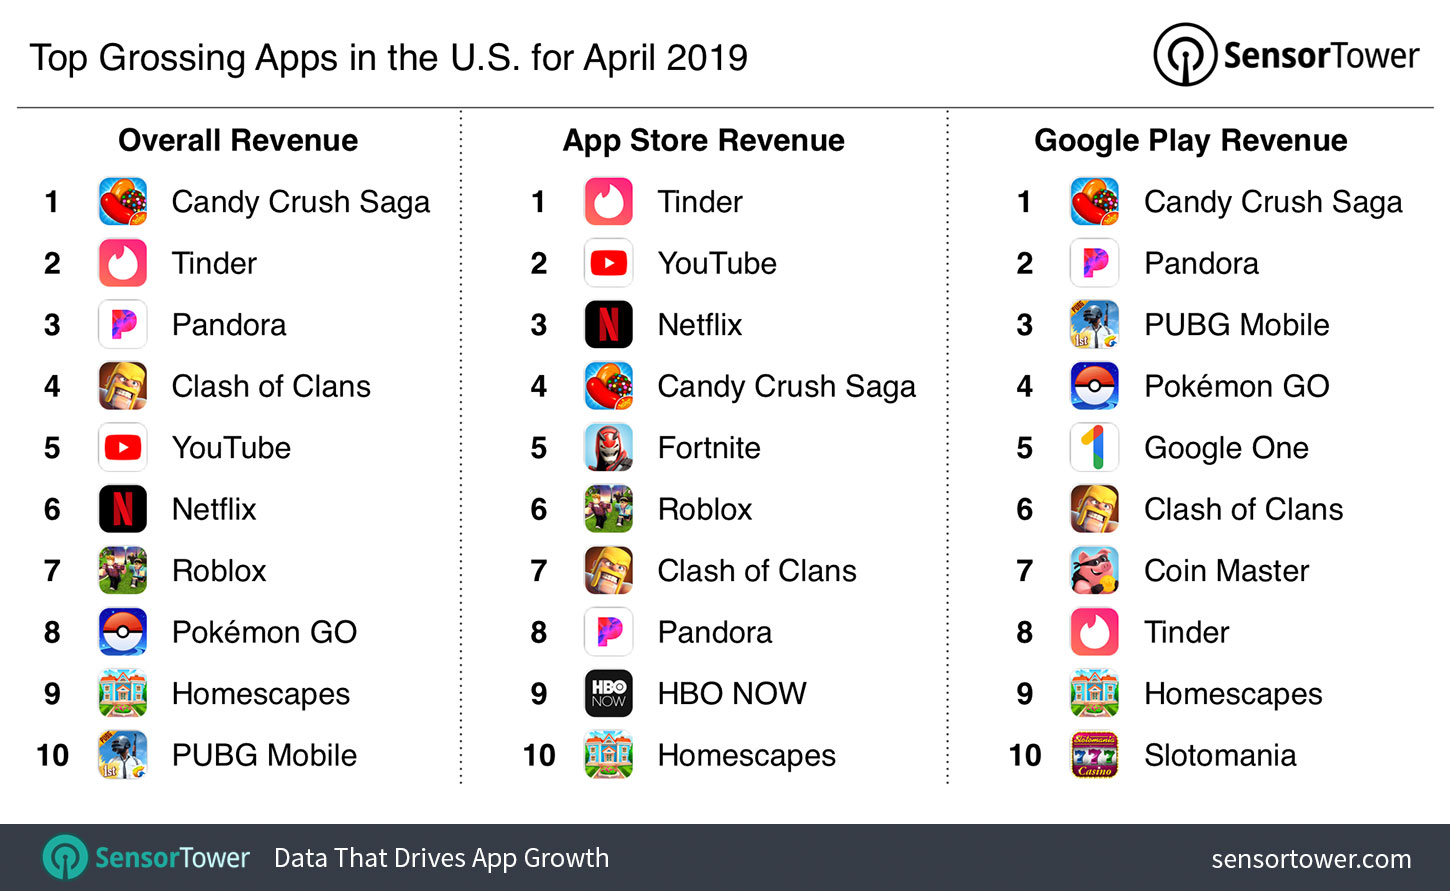 Top Grossing Apps in the U.S. for April 2019